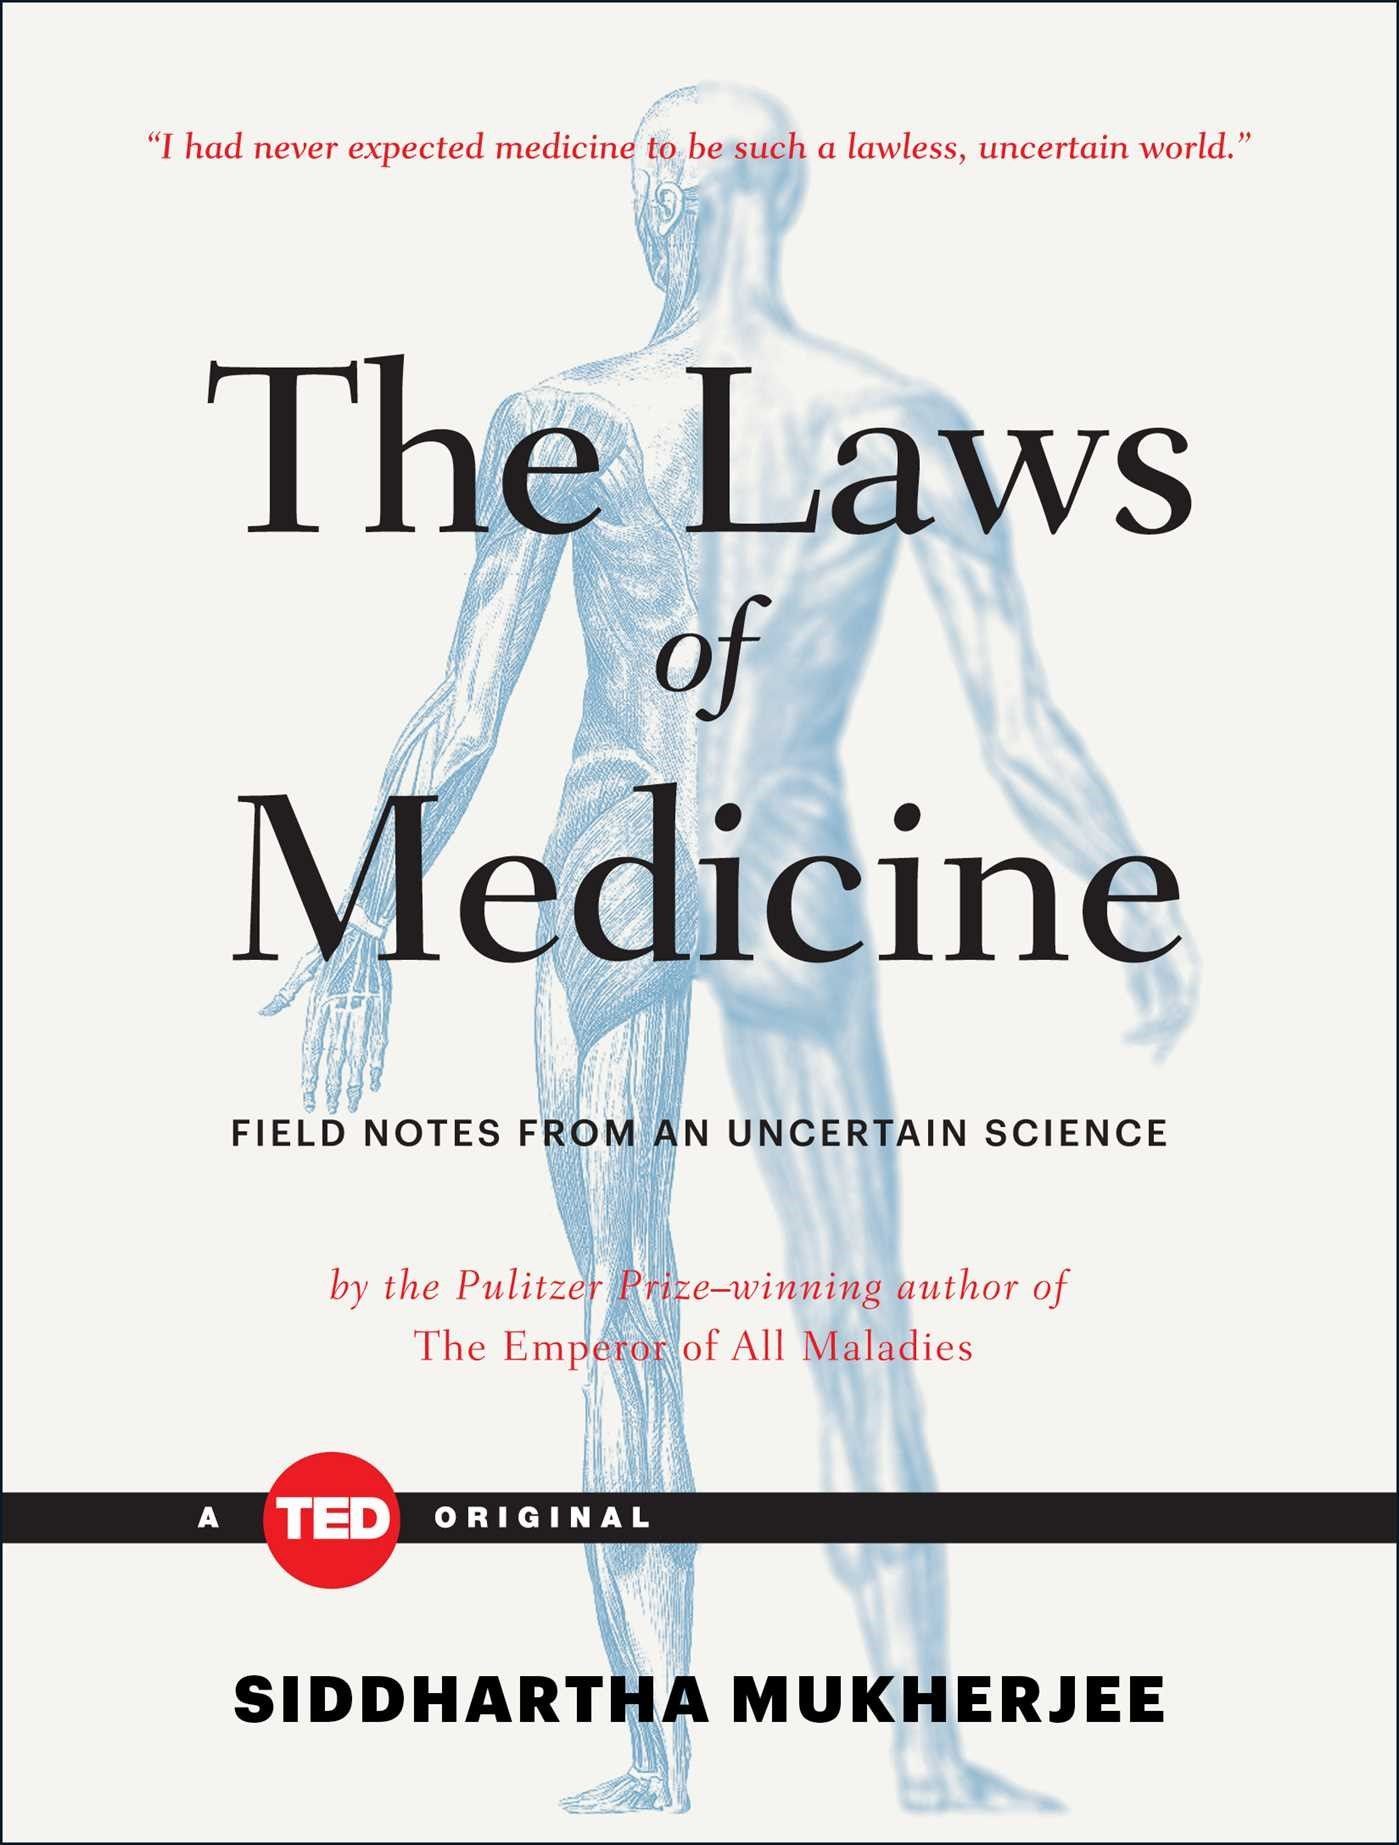 The Lawlessness of Medicine